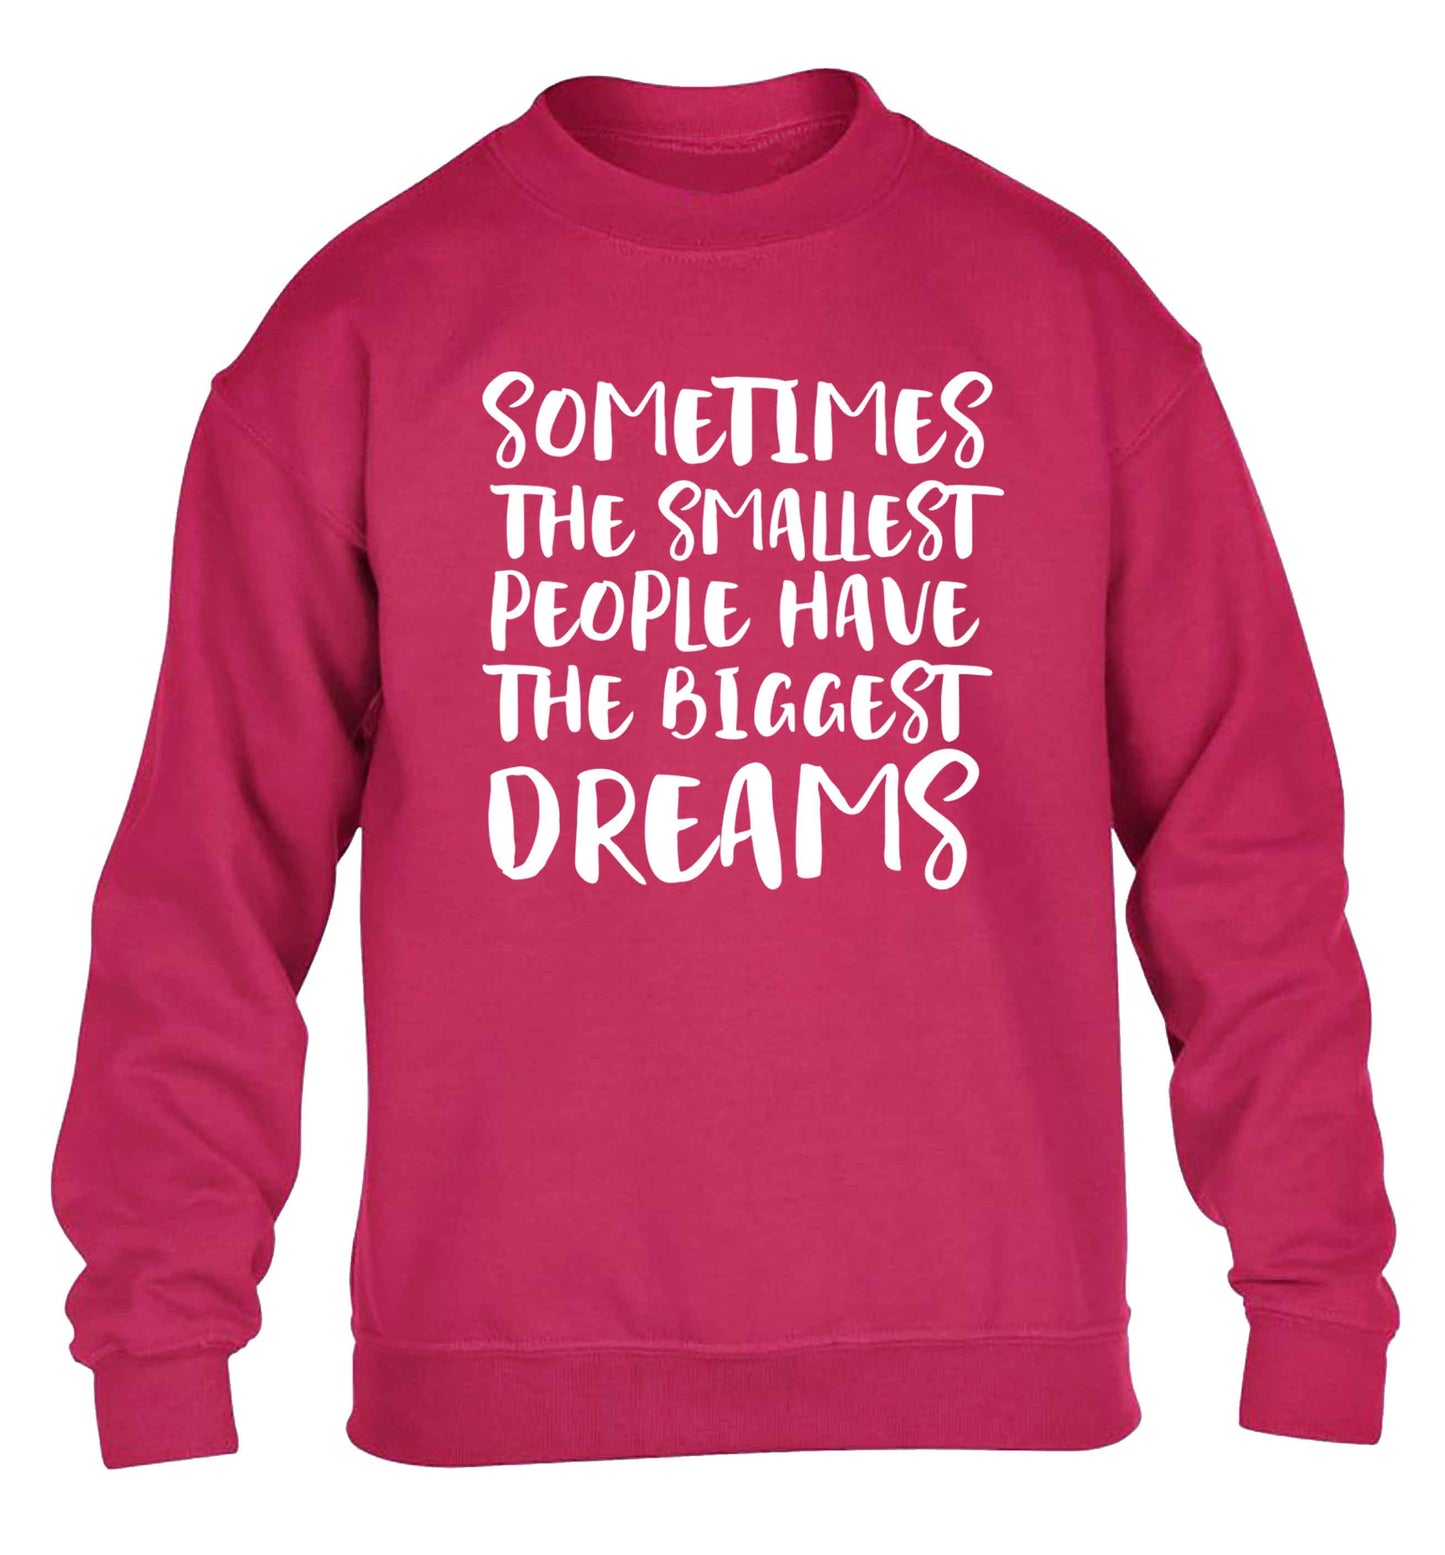 Sometimes the smallest people have the biggest dreams children's pink sweater 12-13 Years